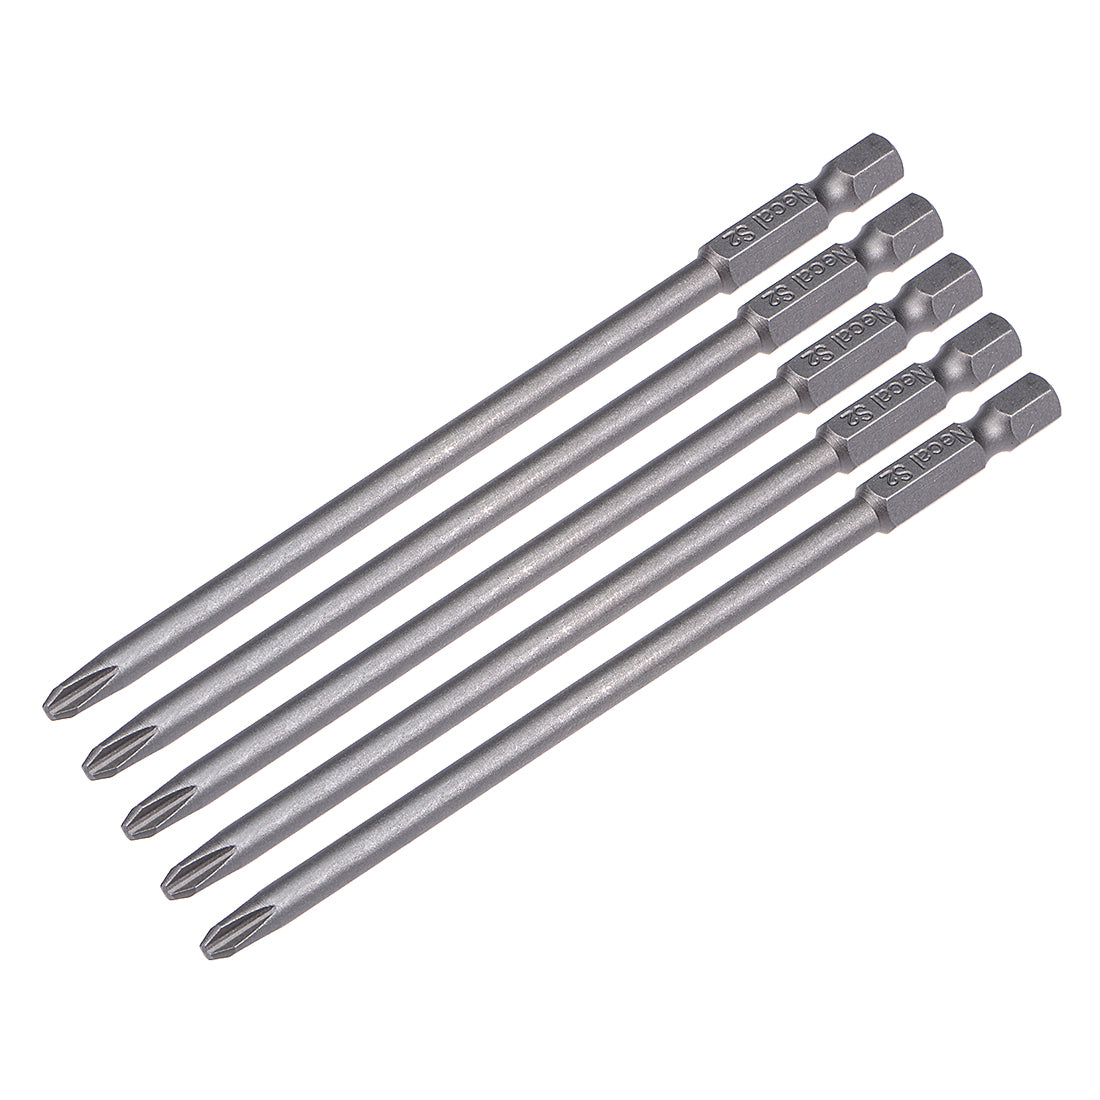 uxcell Uxcell Magnetic Phillips Screwdriver Bits, Hex Shank S2 Steel Power Tools